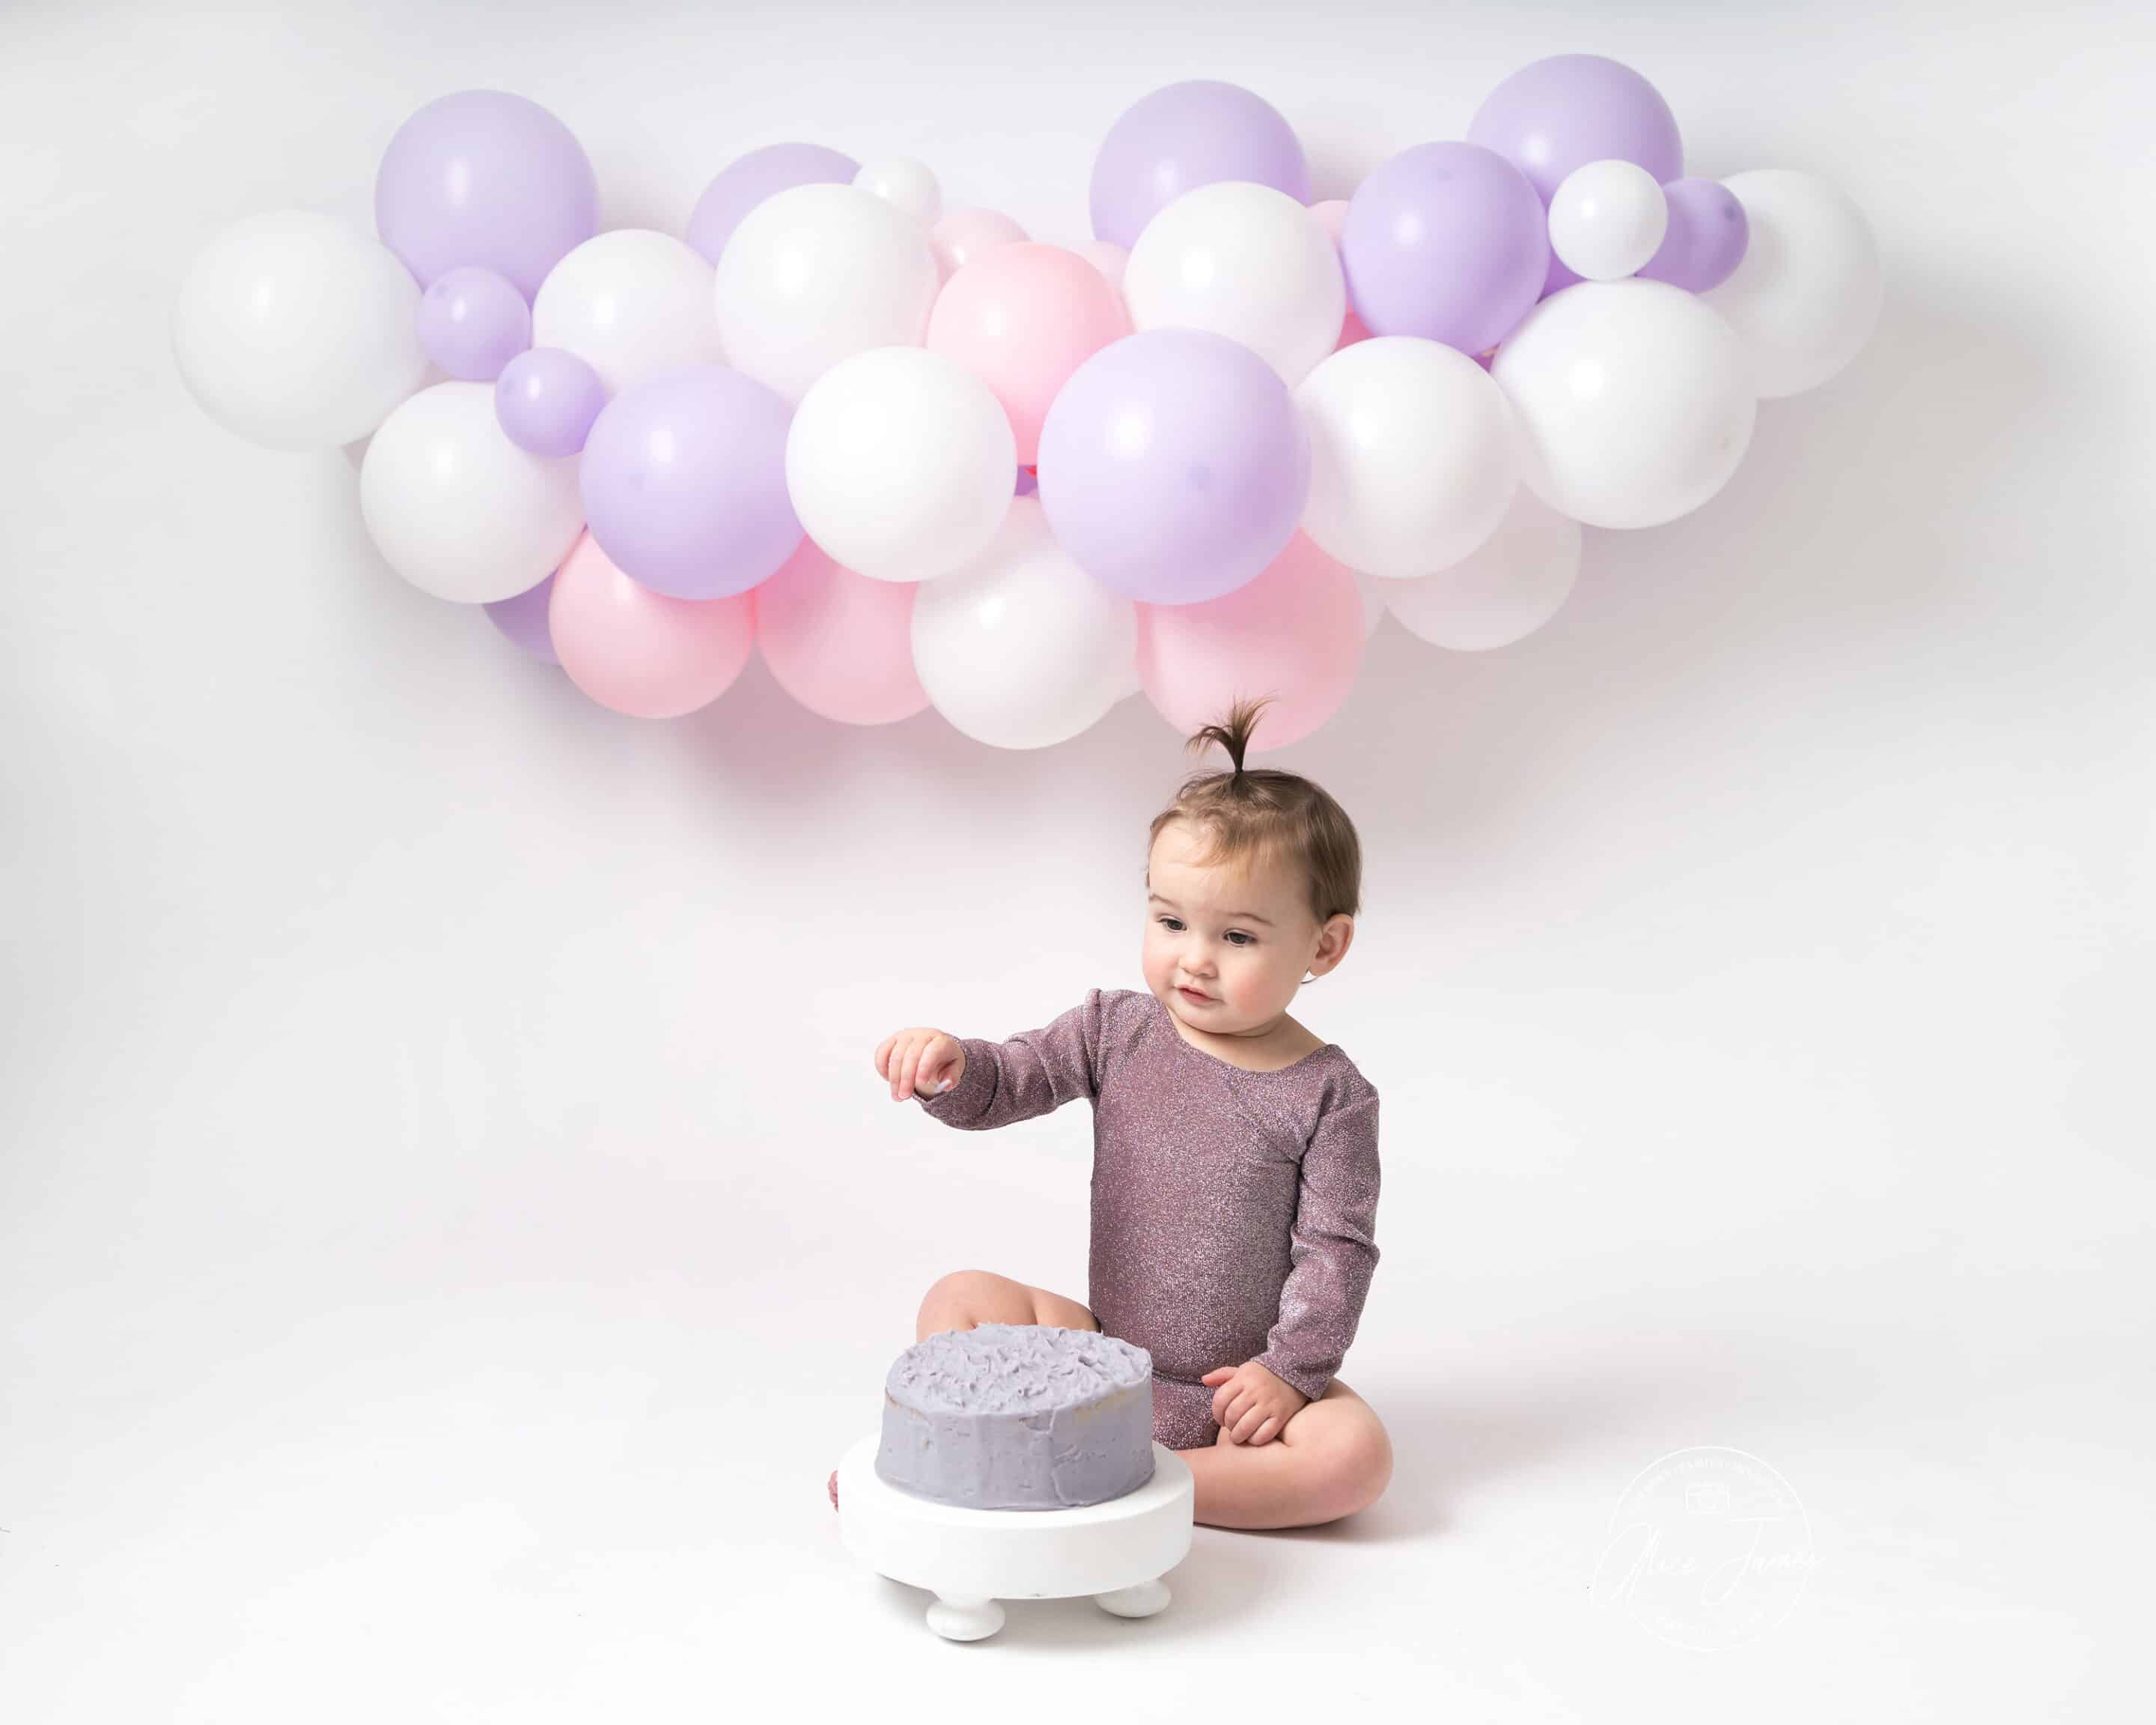 Baby girl in front of balloon wall taken at a cake smash photoshoot in Hitchin.